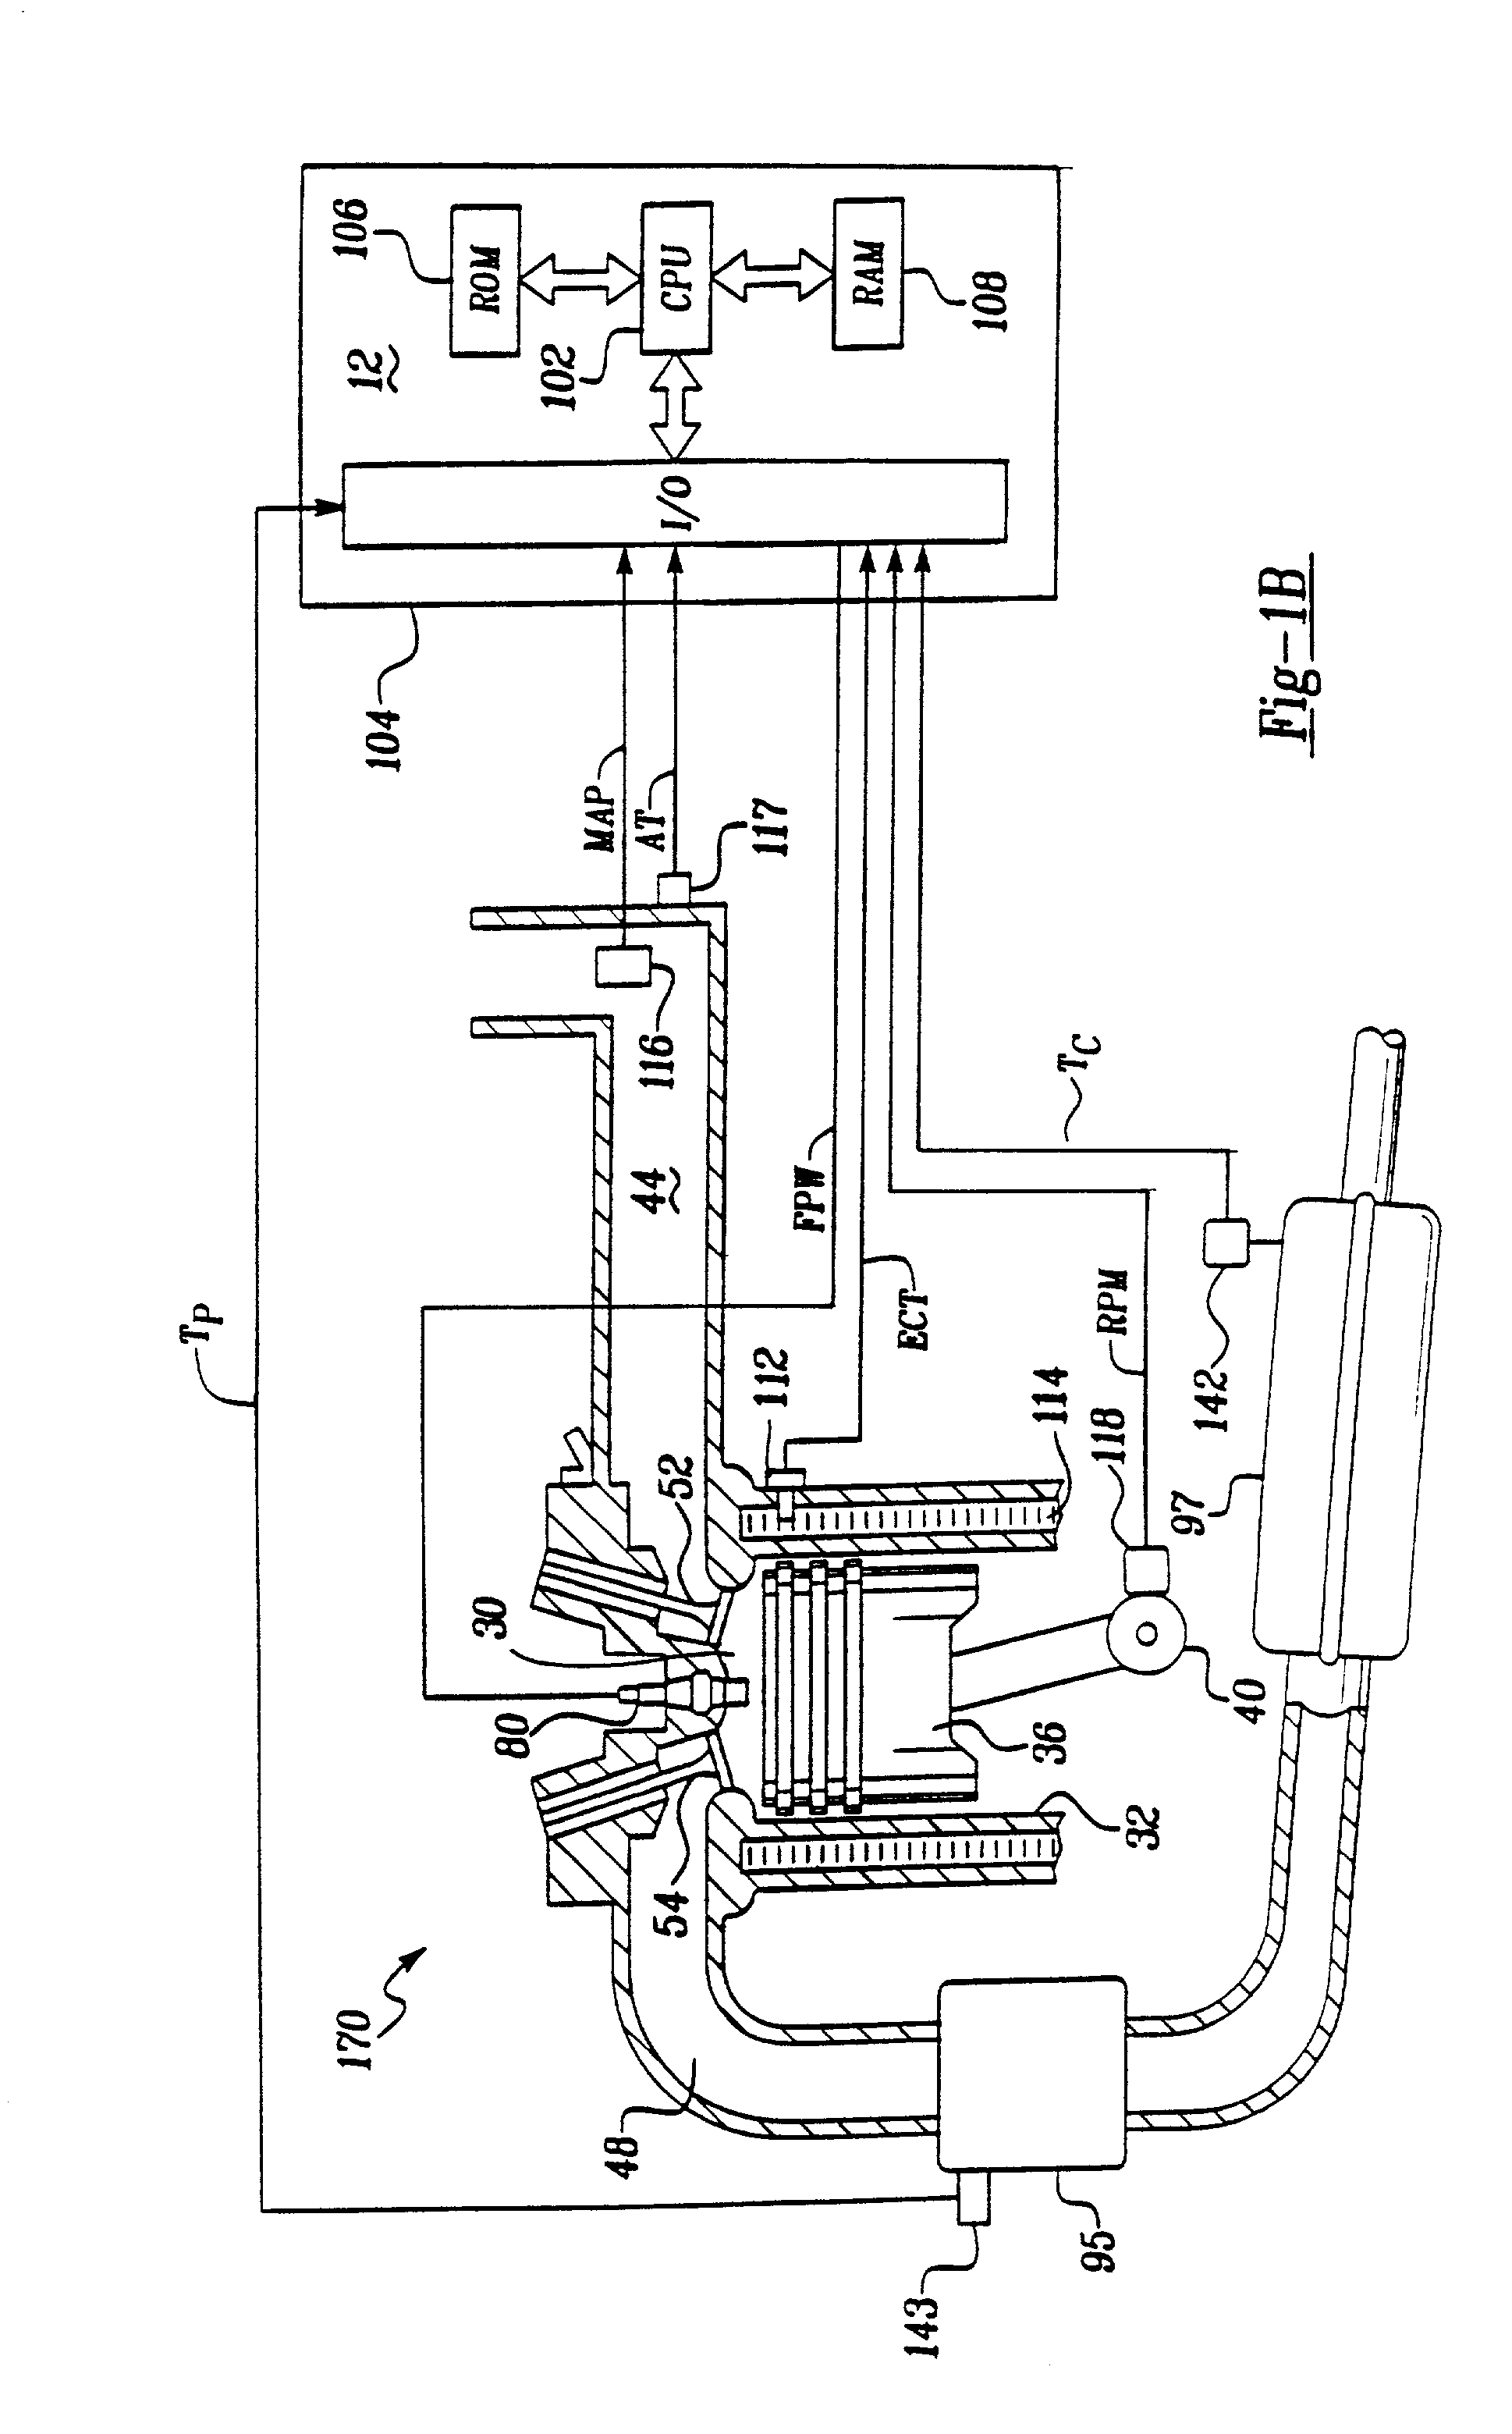 Engine control system and method with lean catalyst and particulate filter